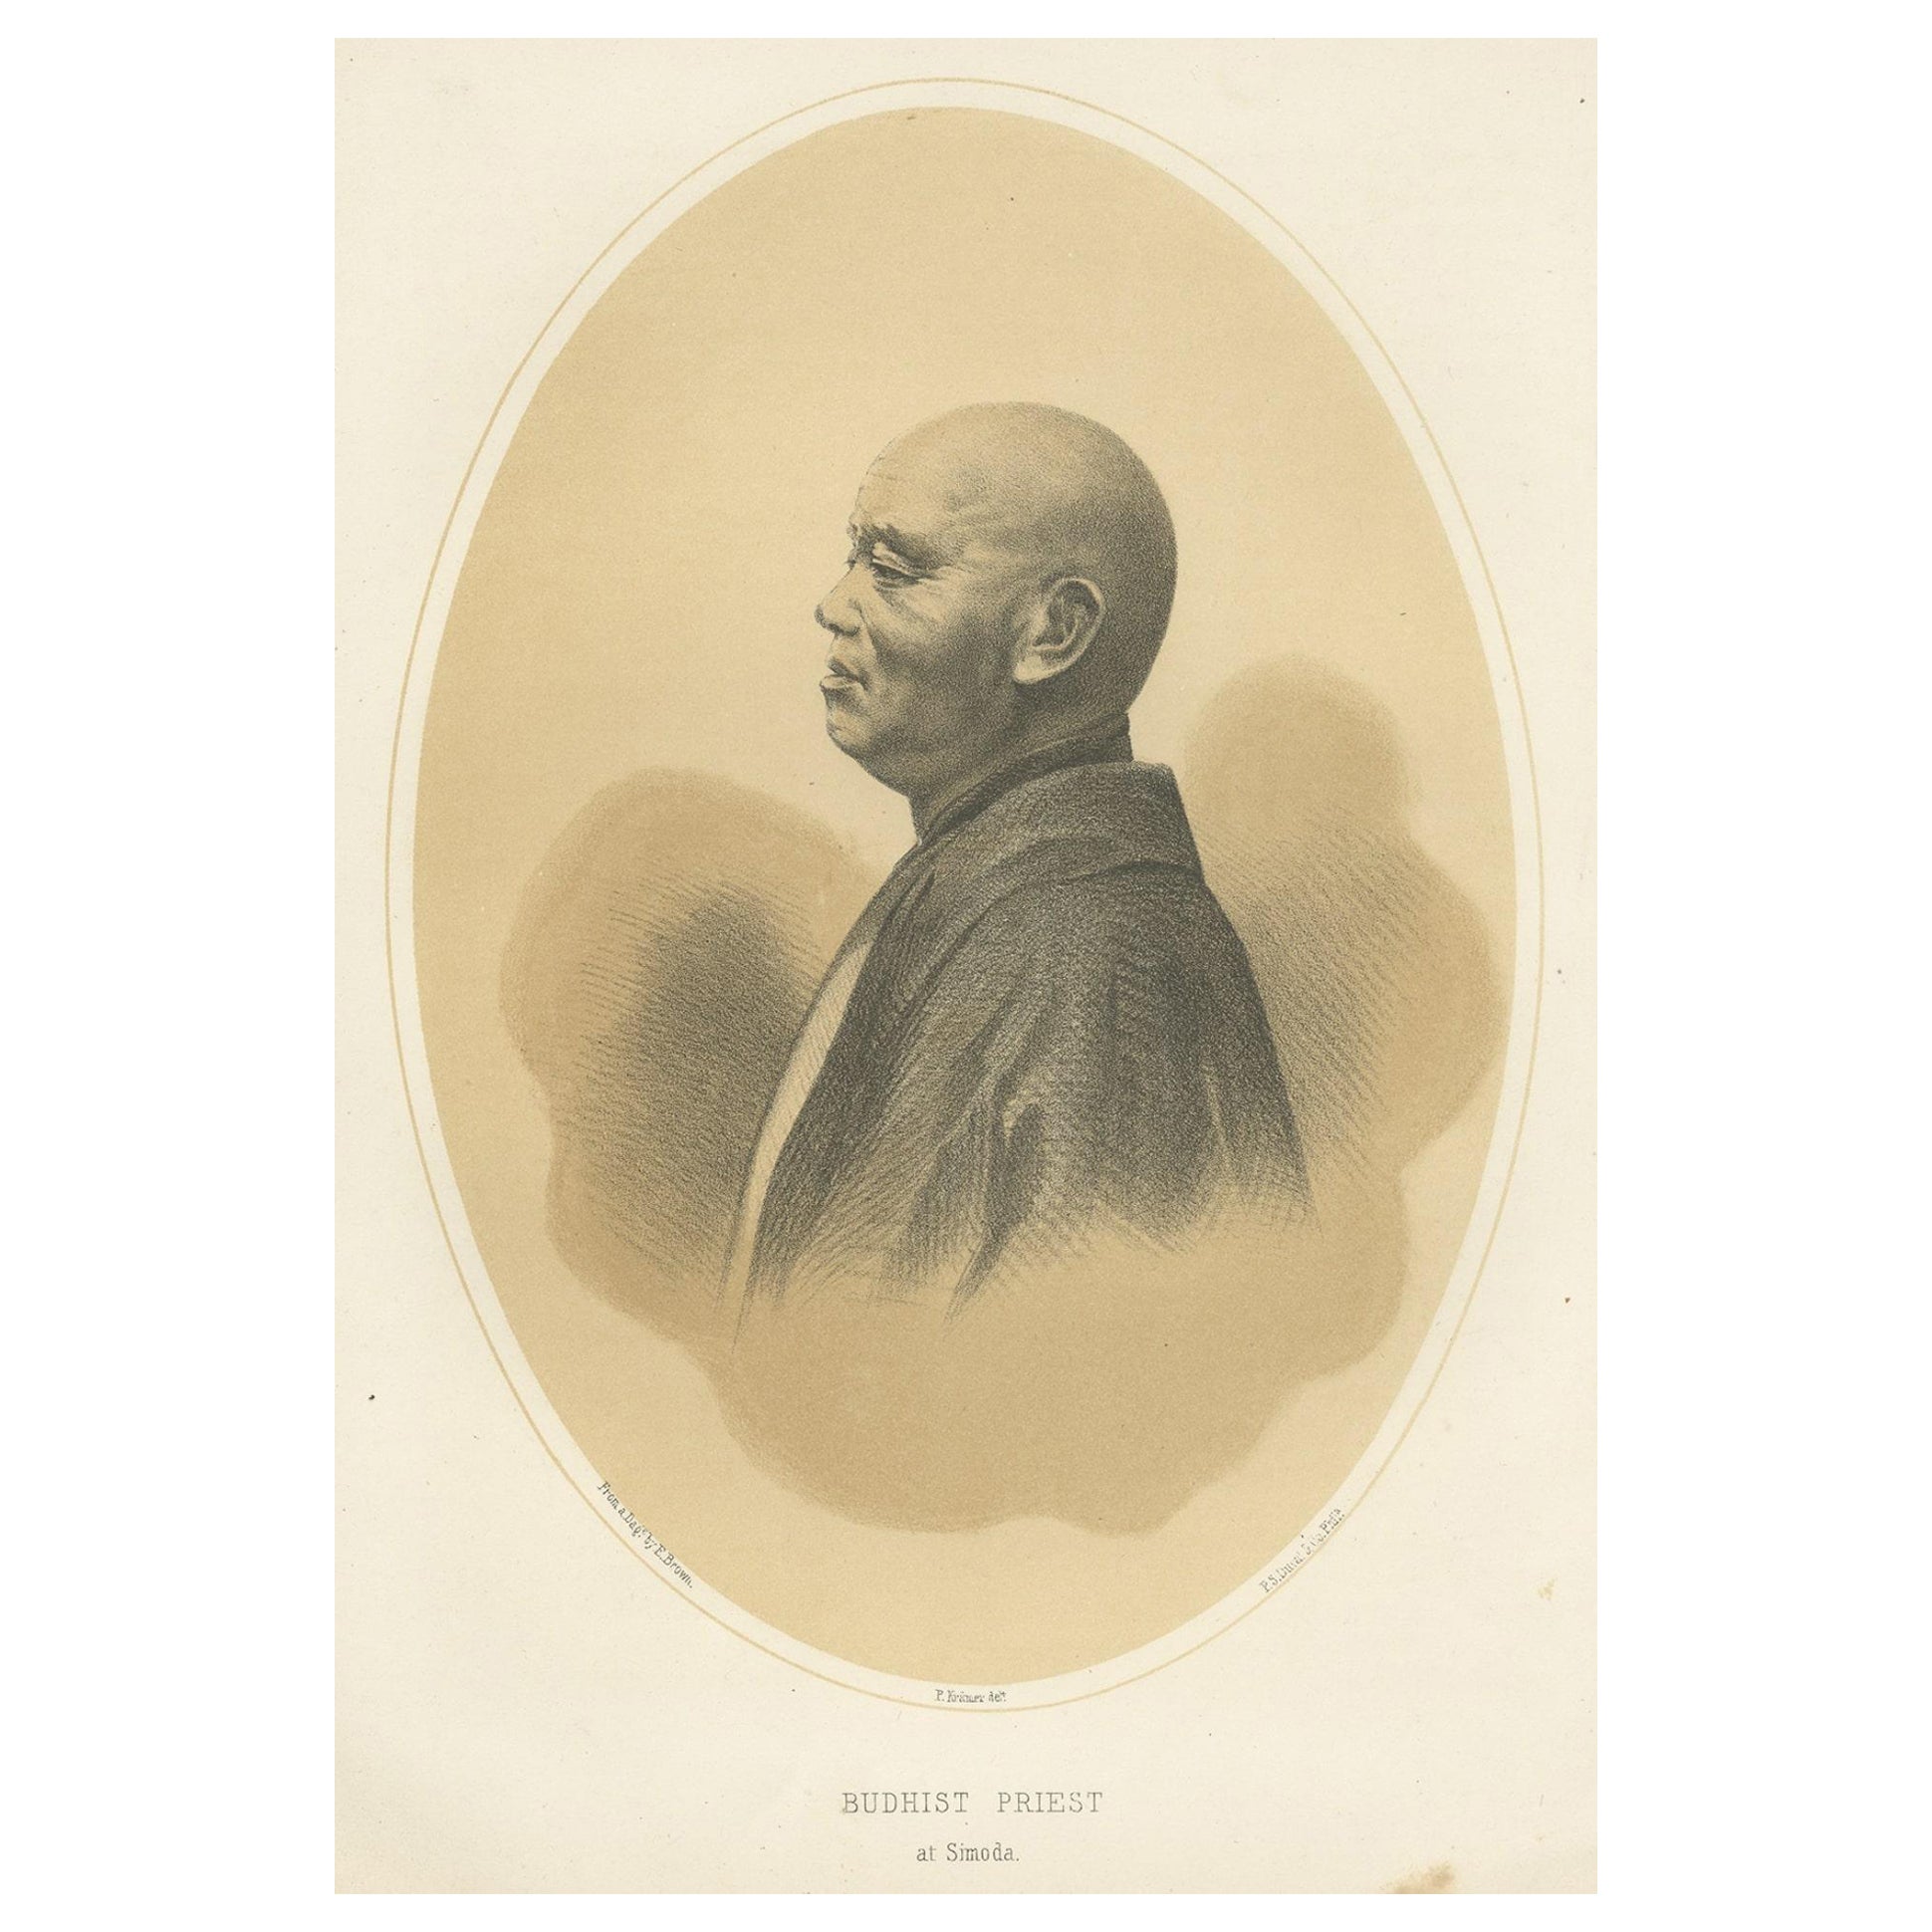 Old Lithograph of a Buddhist priest of Shimoda, Japan, 1856